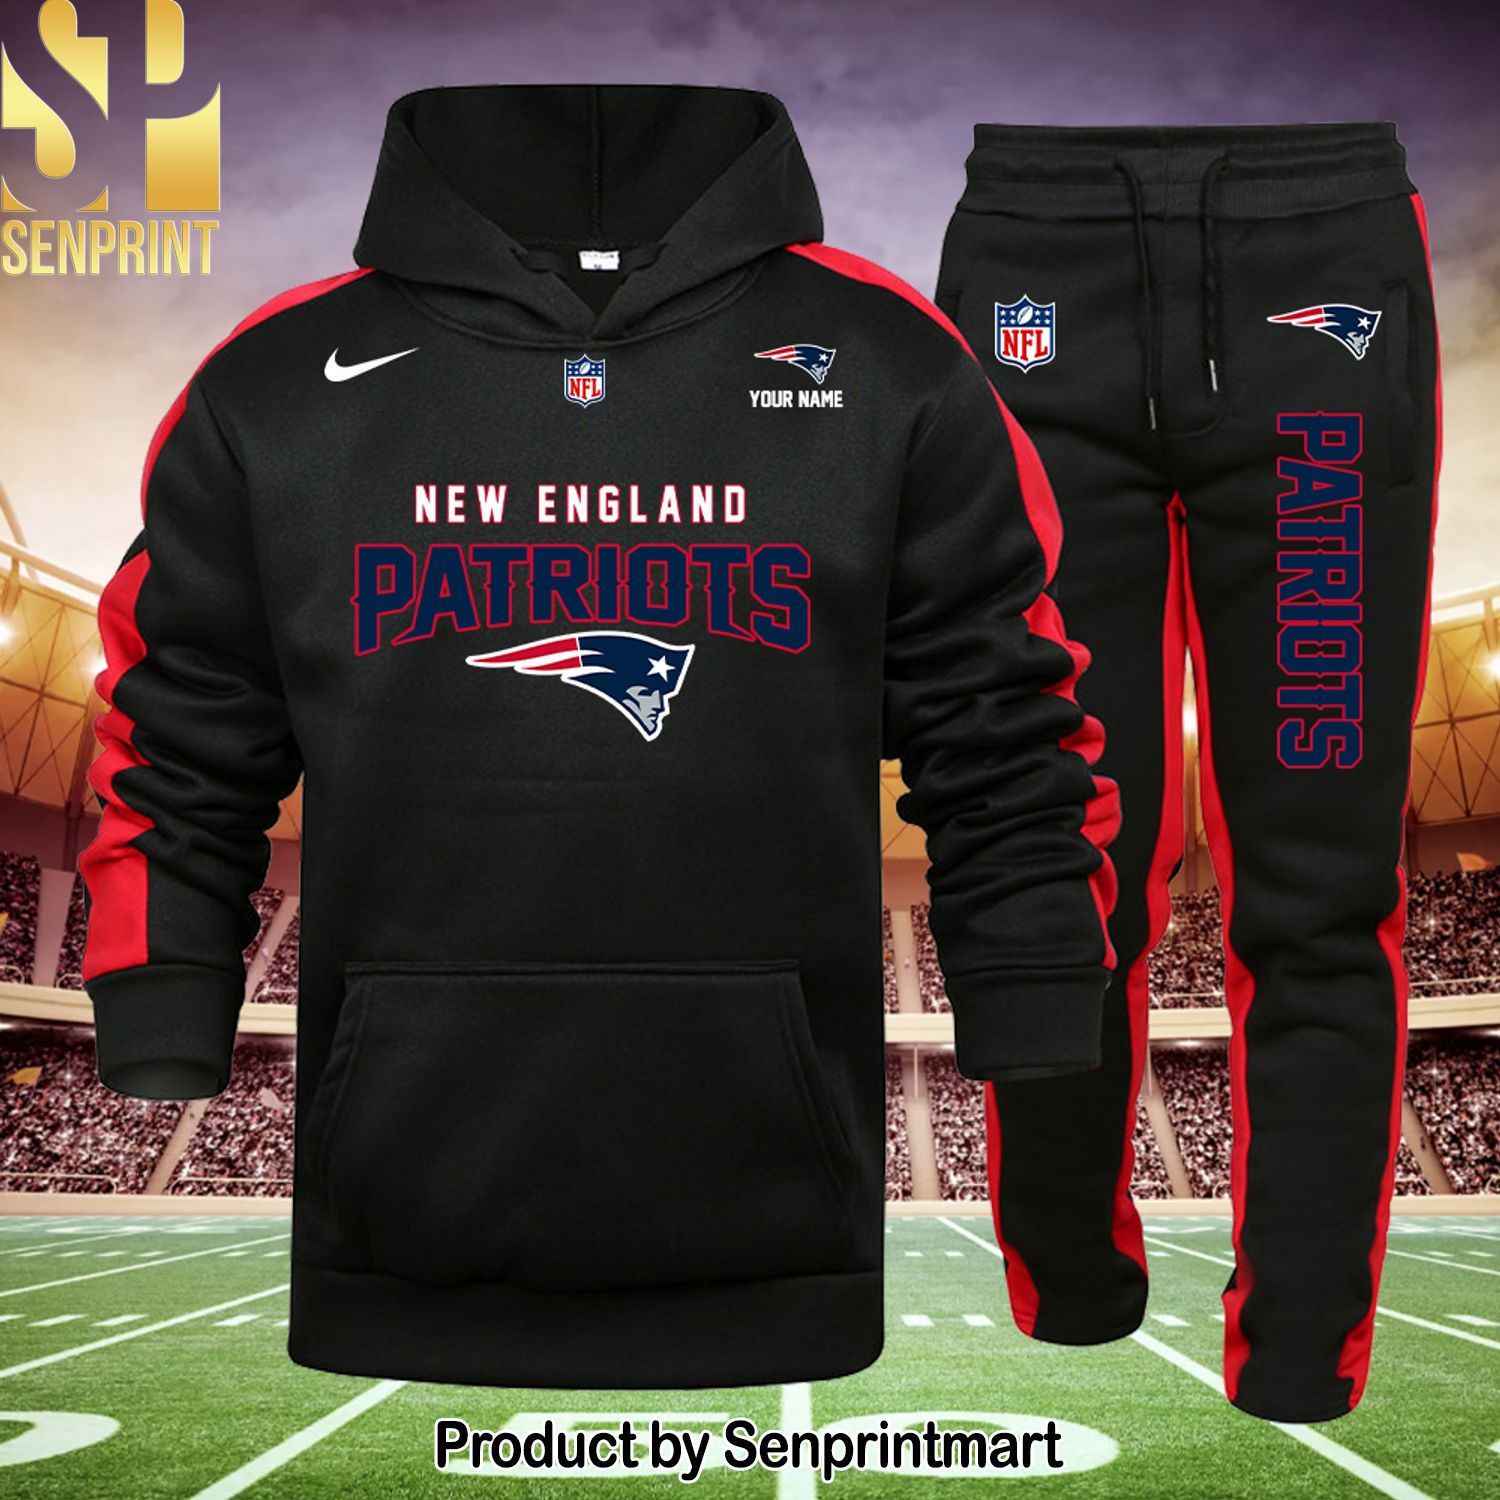 NFL New England Patriots New Outfit Full Printed Shirt and Sweatpants